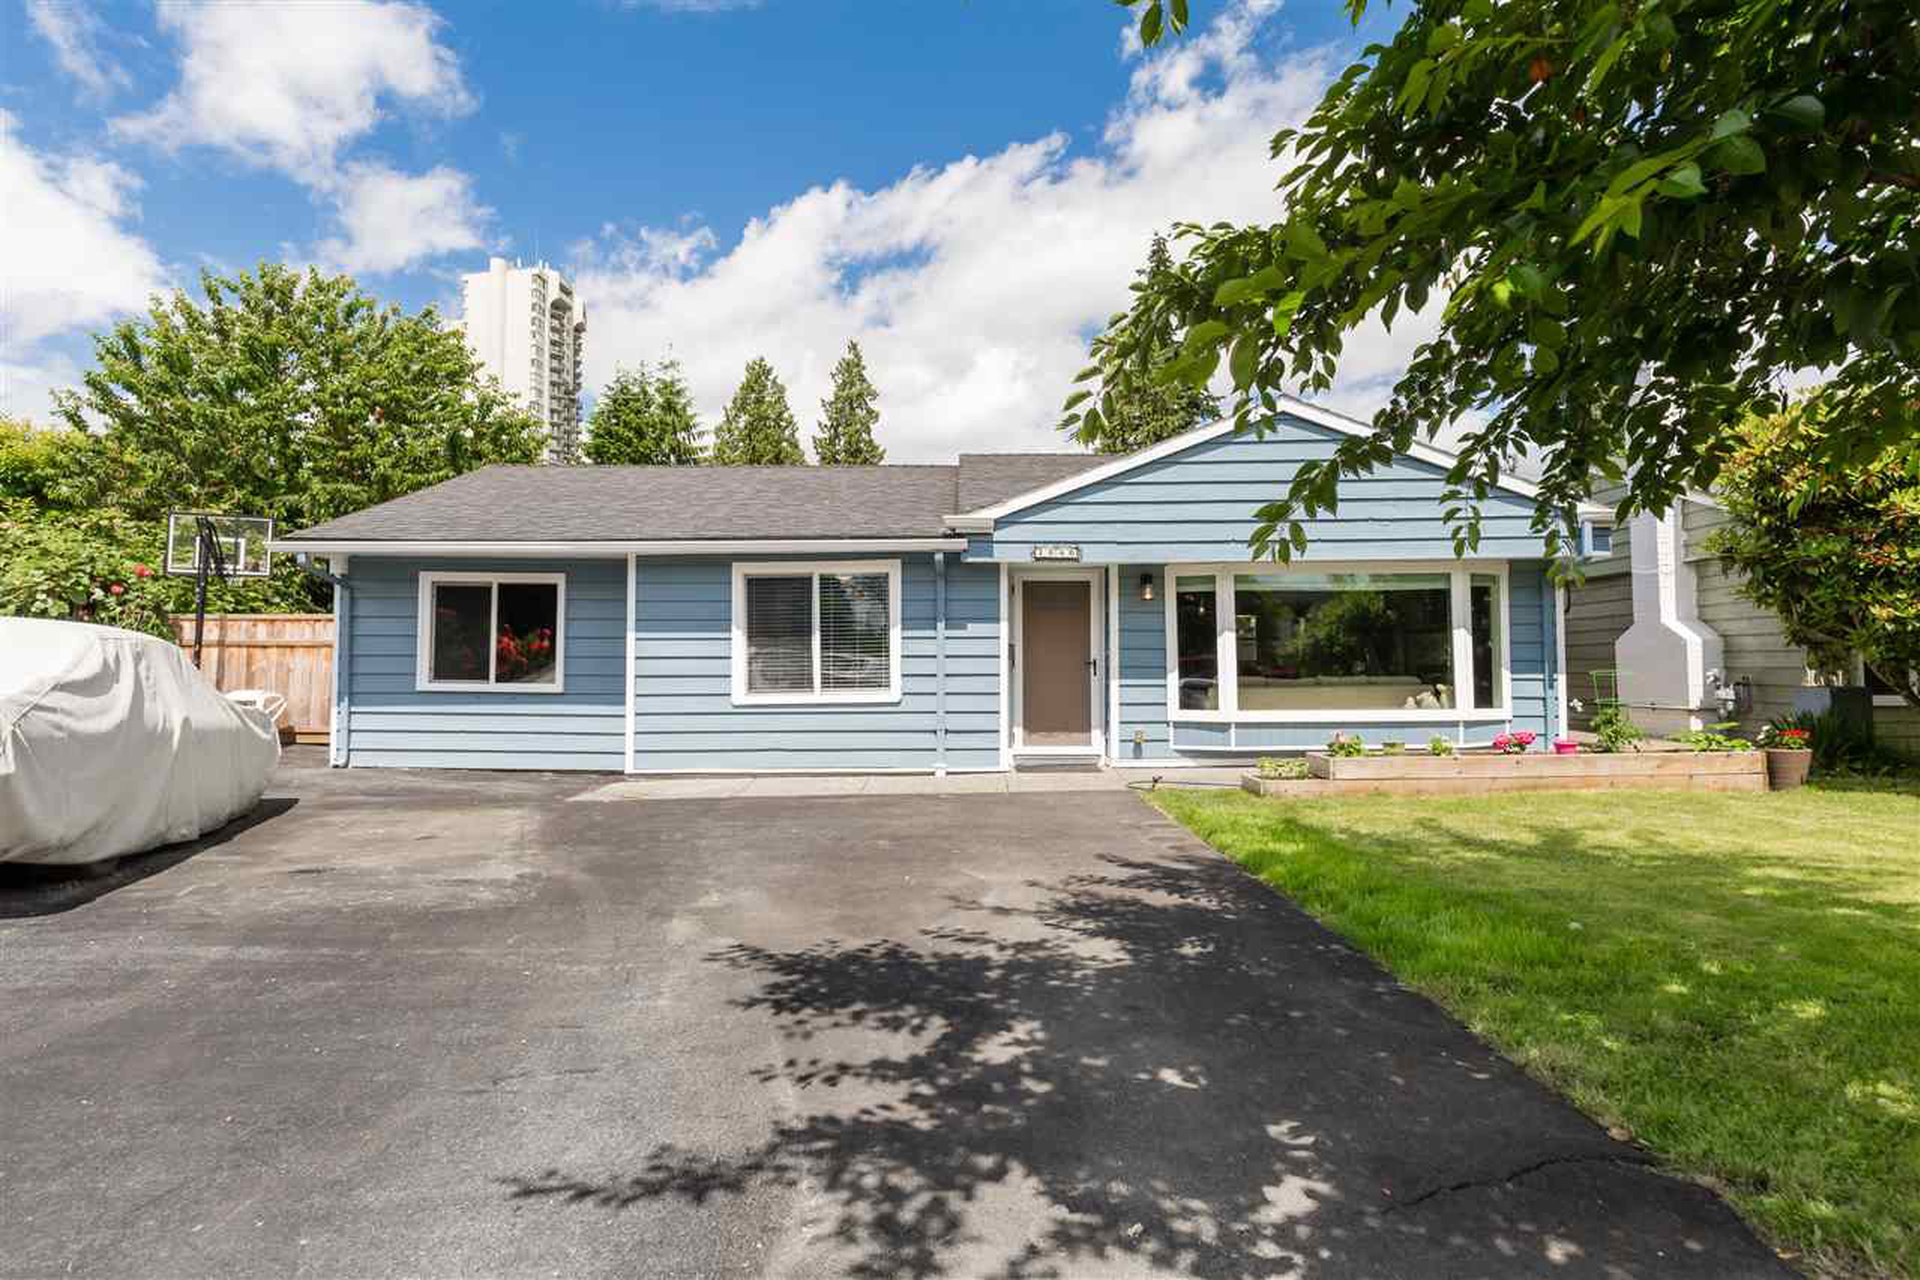 ranchers for sale in north vancouver